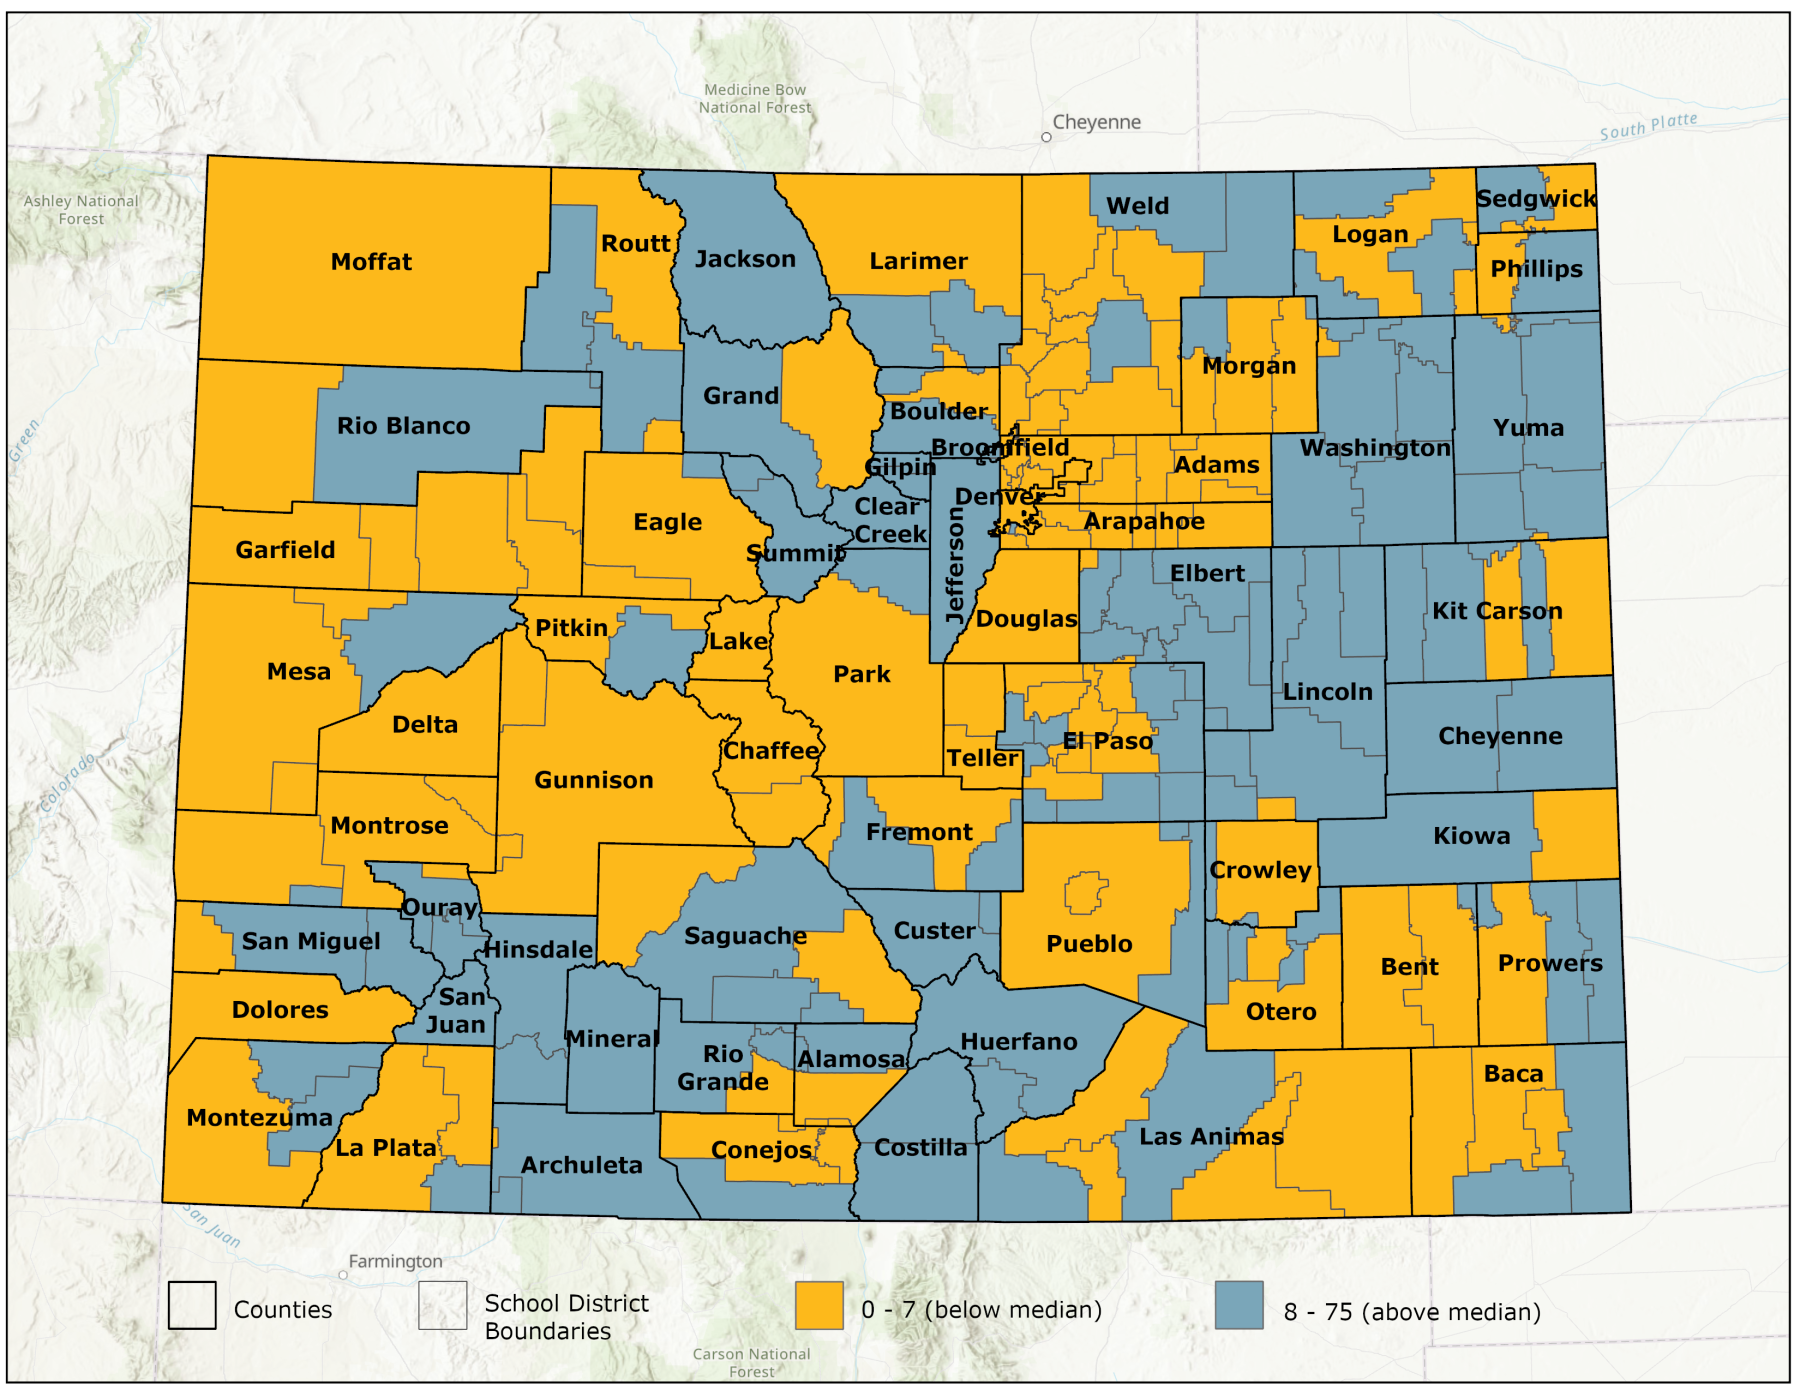 Colorado map showing school districts, color coded to show those above and below the median ratio of music and art teachers